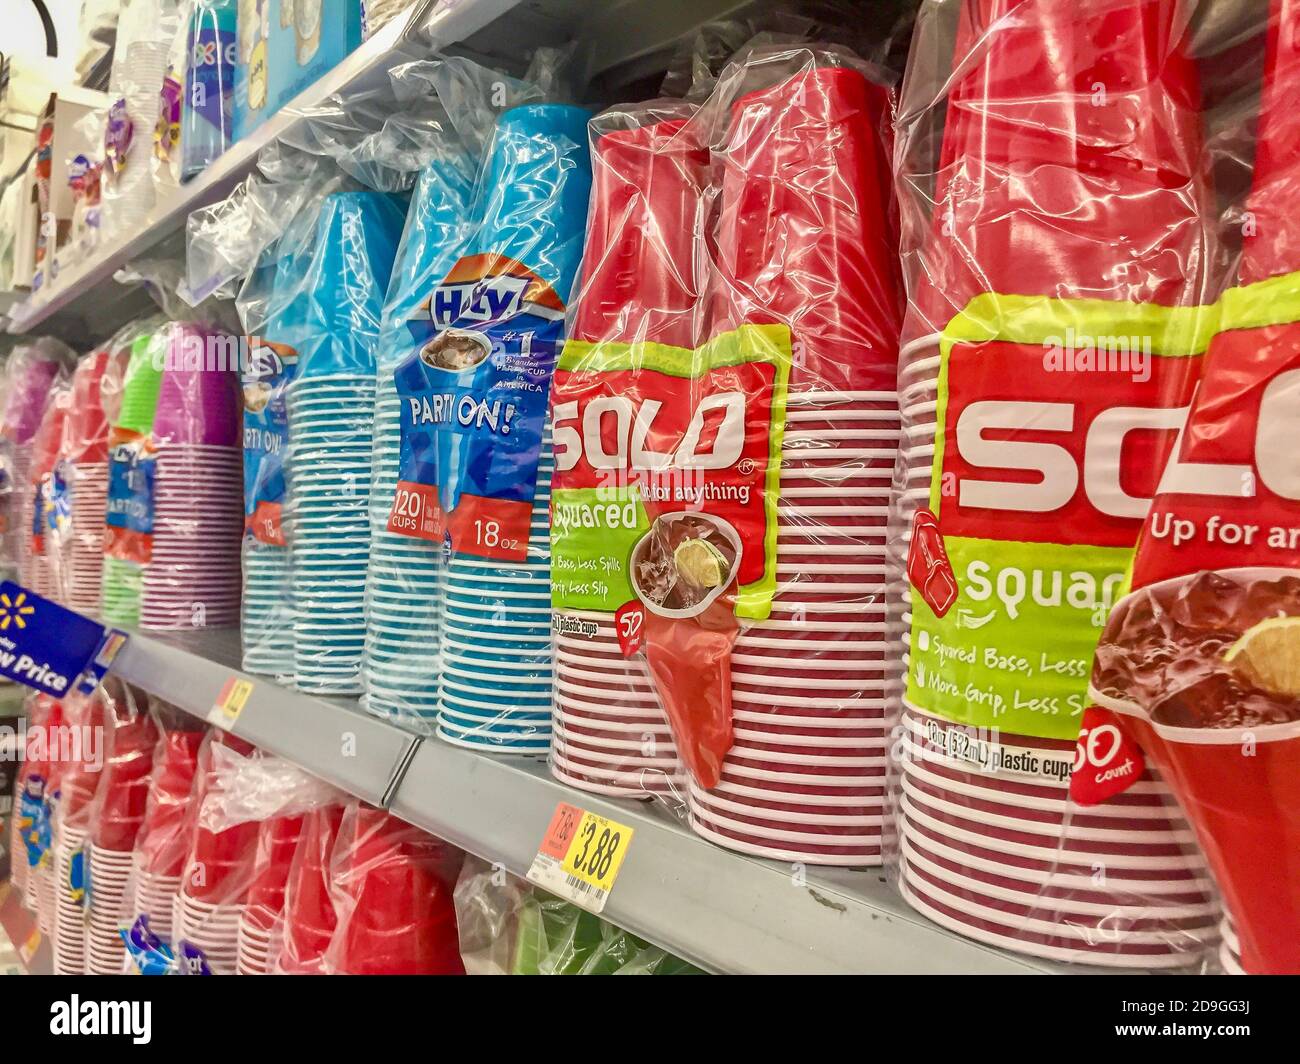 Red Solo Cups on a store shelf Stock Photo